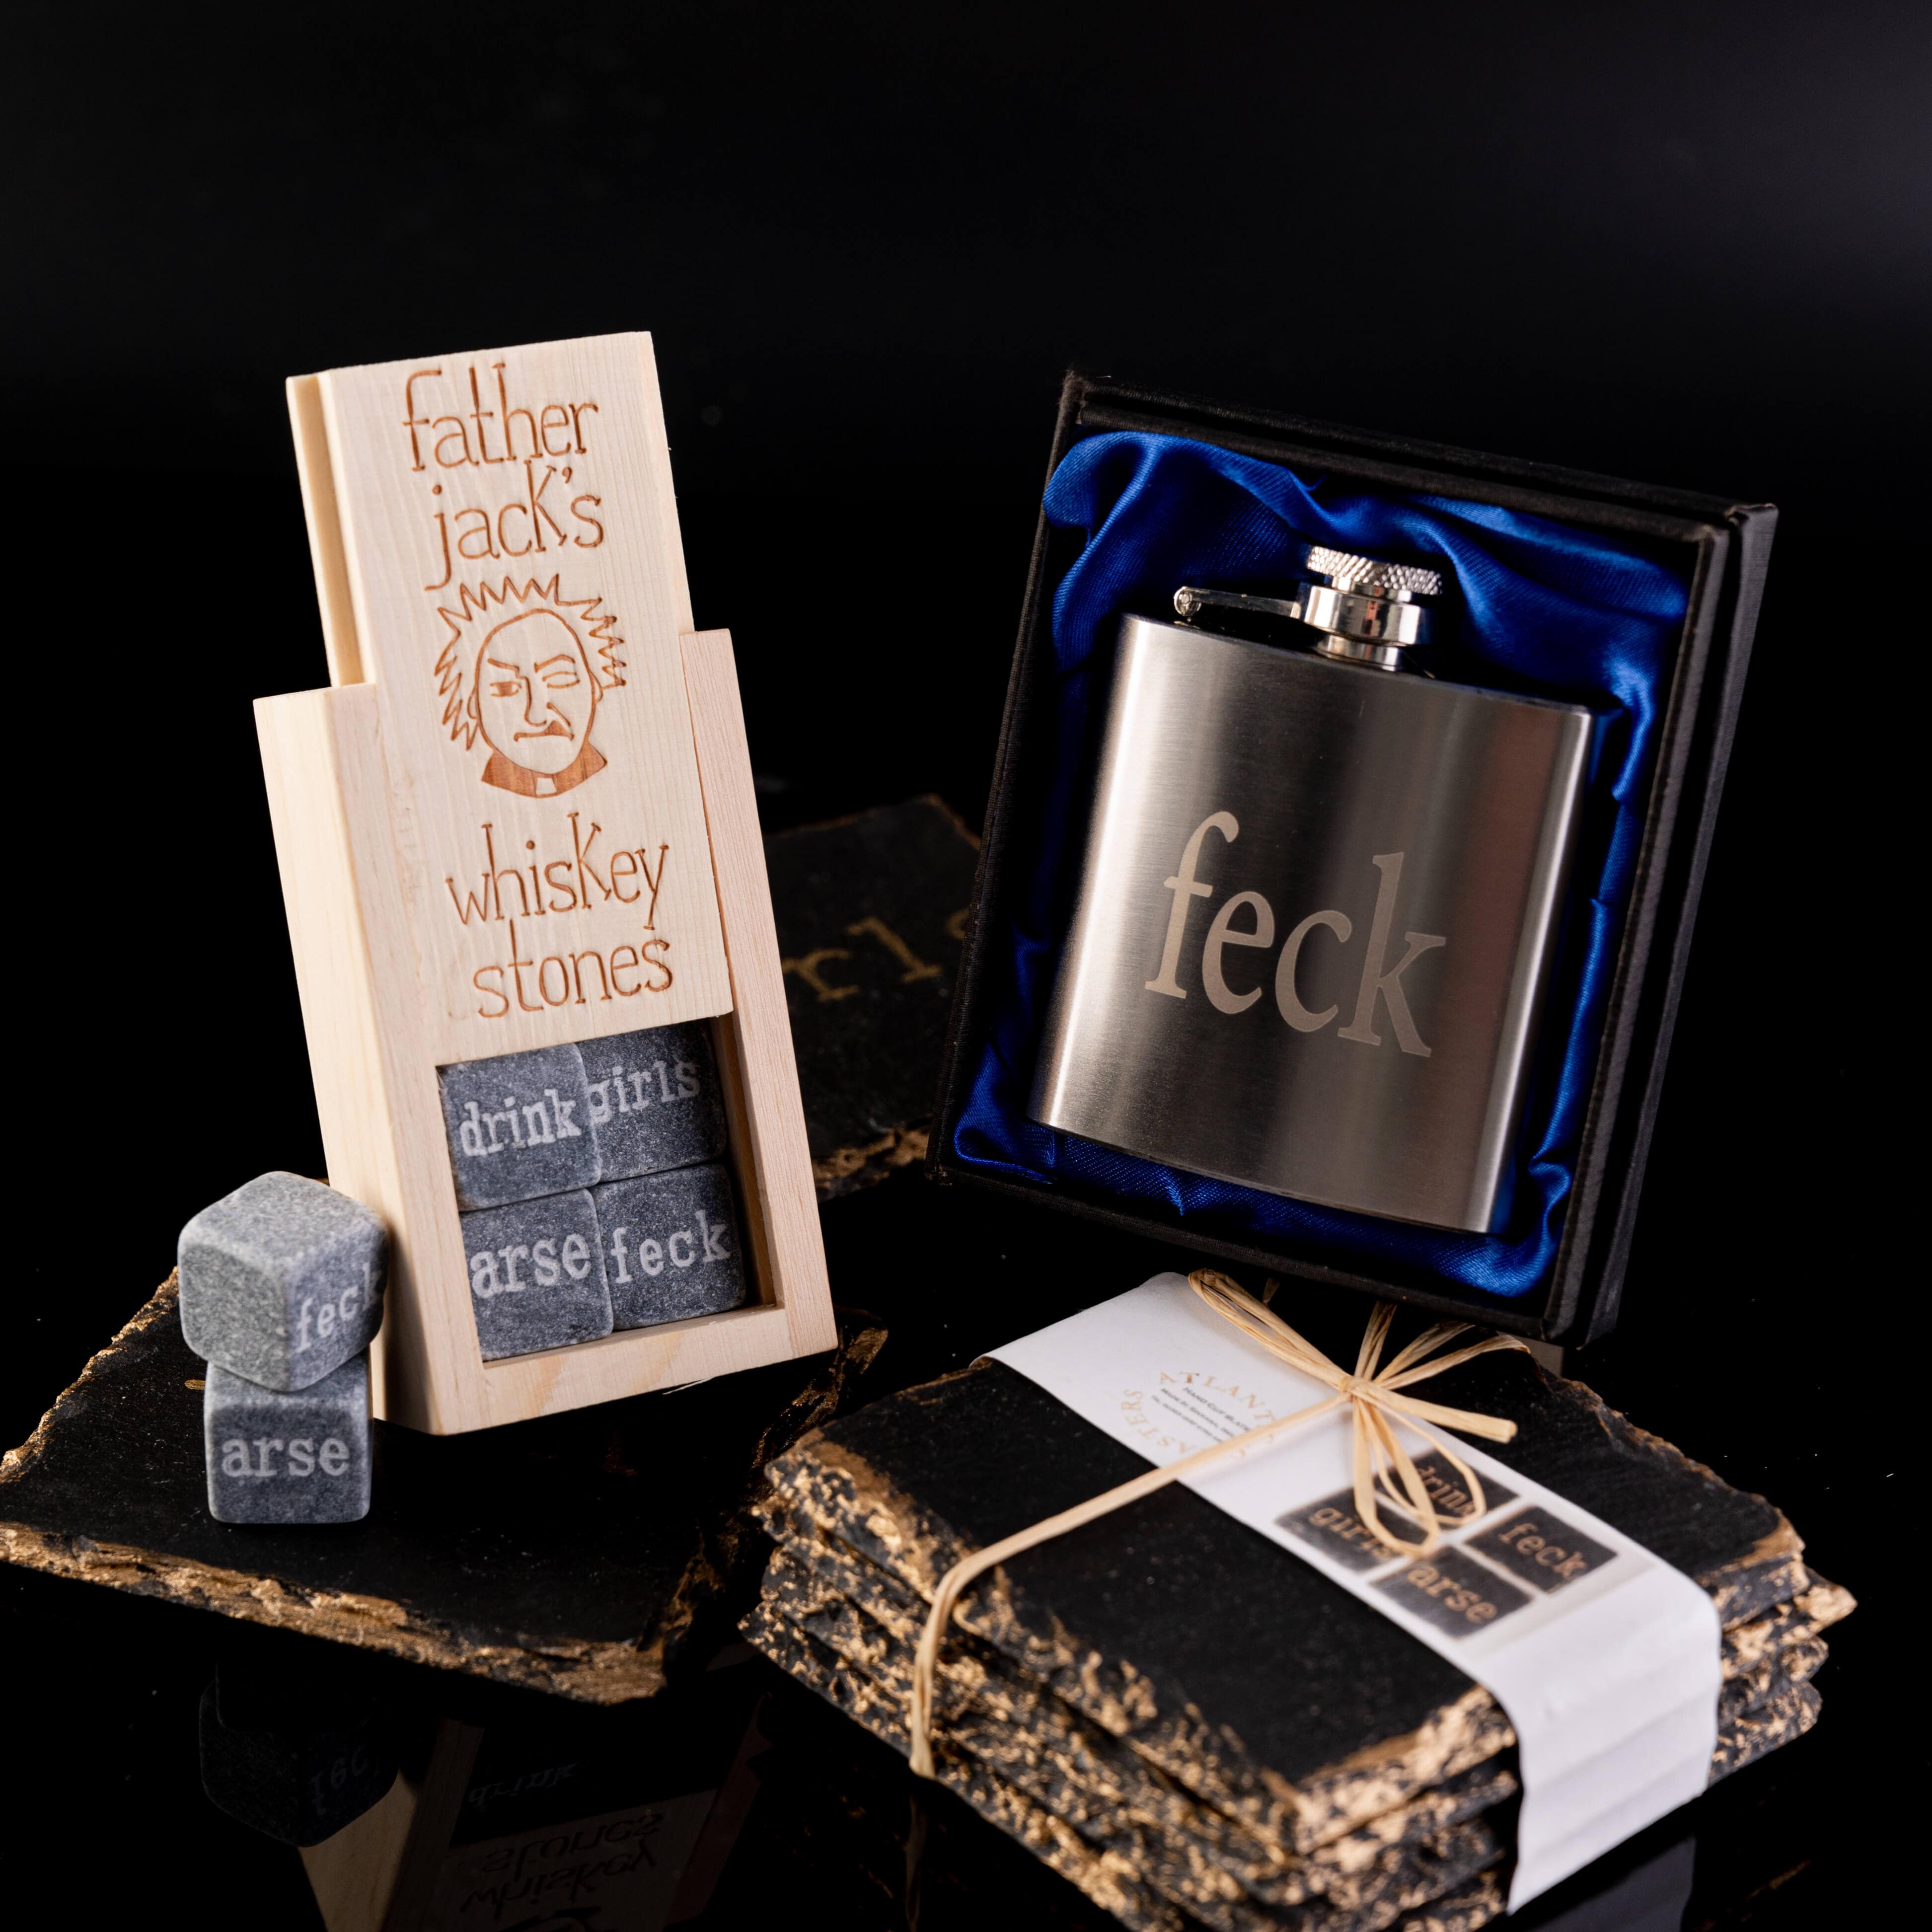 <img src="father jack gift set.jpg" alt="father jack gift bundle with coasters, whiskey stones and hip flask">